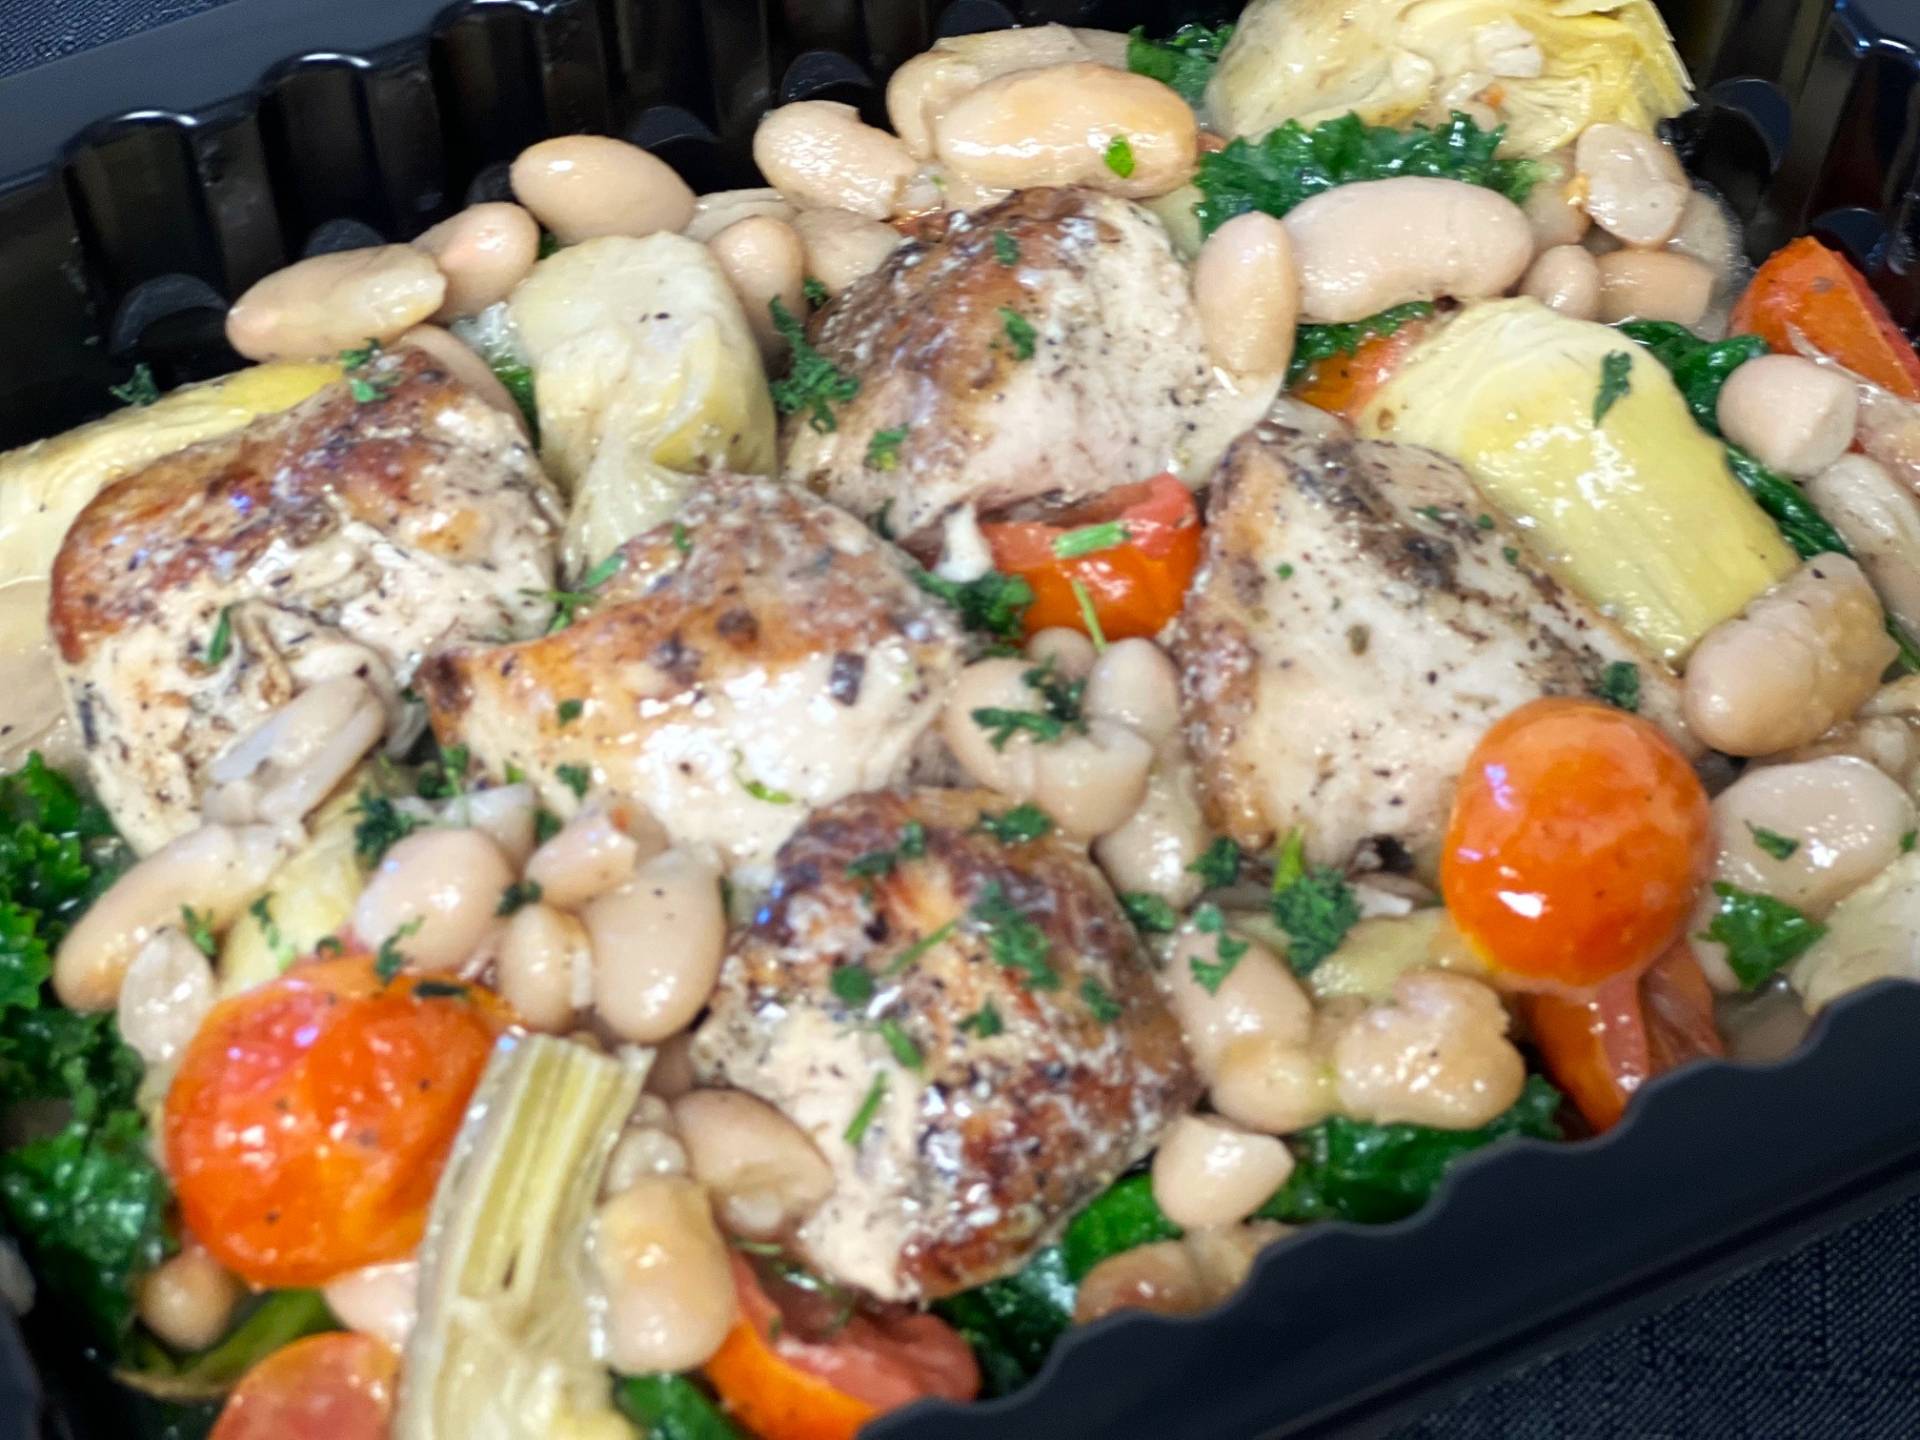 Braised Chicken with White Beans & Artichokes